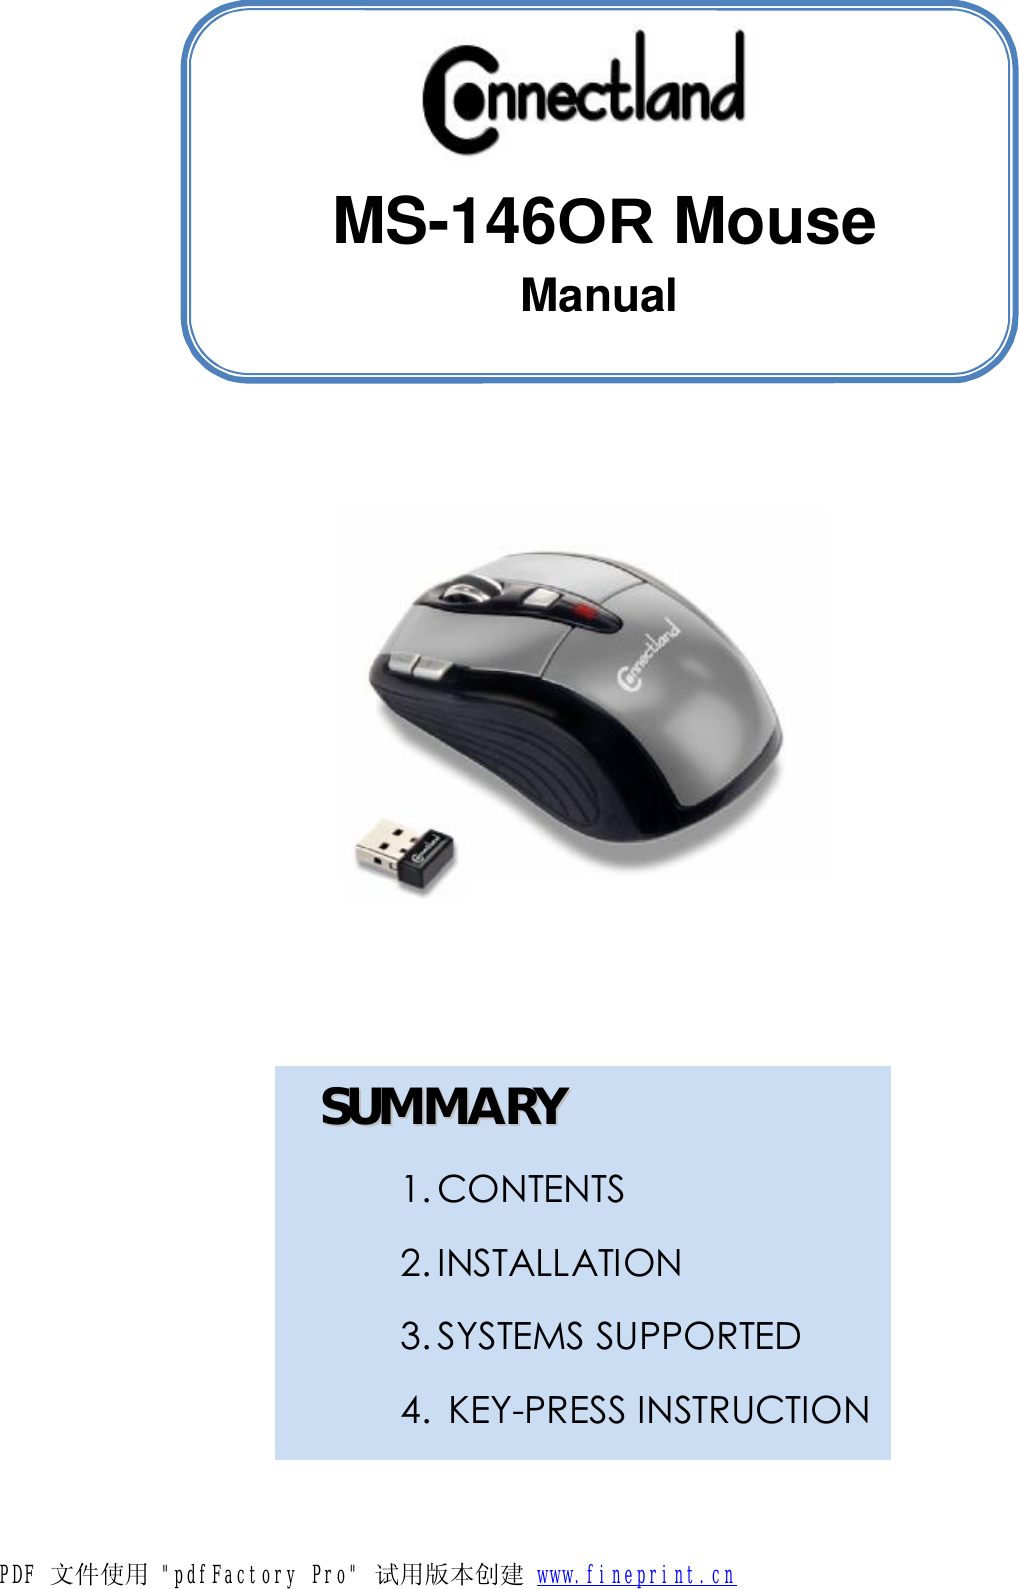                       MS-146OR Mouse Manual  SSUUMMMMAARRYY  1. CONTENTS 2. INSTALLATION 3. SYSTEMS SUPPORTED 4.  KEY-PRESS INSTRUCTION PDF 文件使用 &quot;pdfFactory Pro&quot; 试用版本创建           www.fineprint.cn